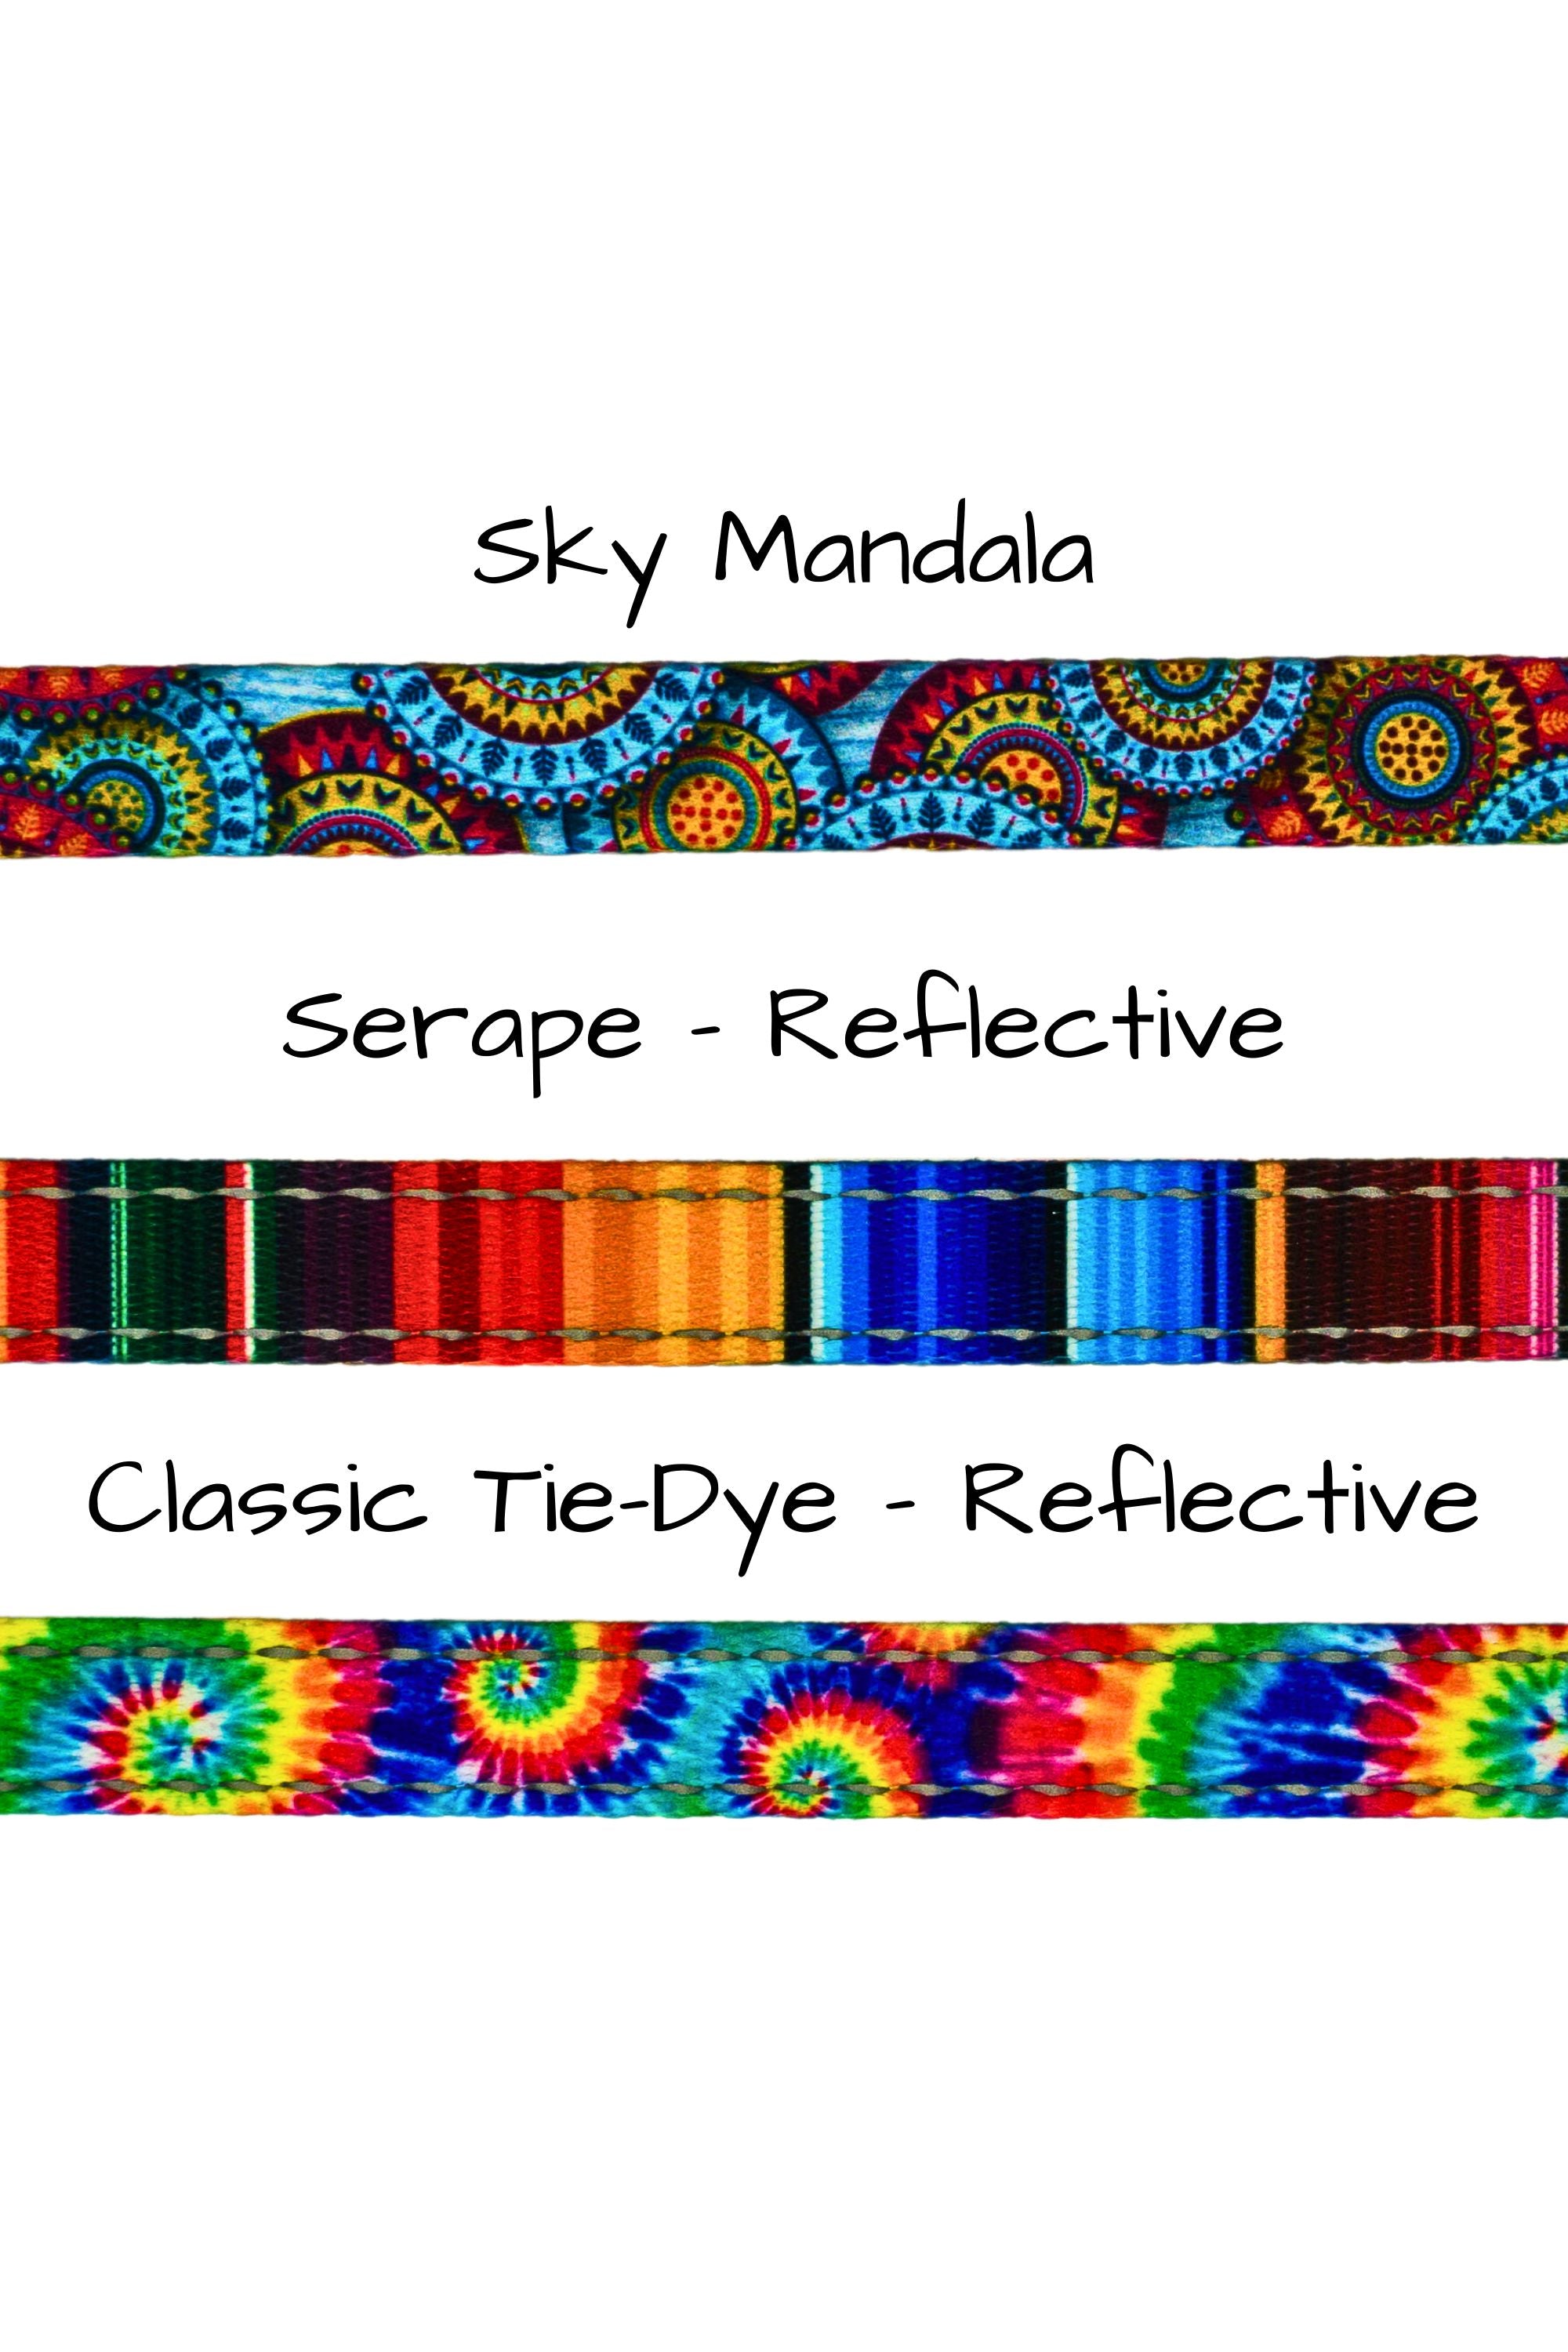 Patterned webbing for the adjustable length hands free leashes for small dogs is available in a sky mandala, a reflective serape, or a reflective classic tie dye.